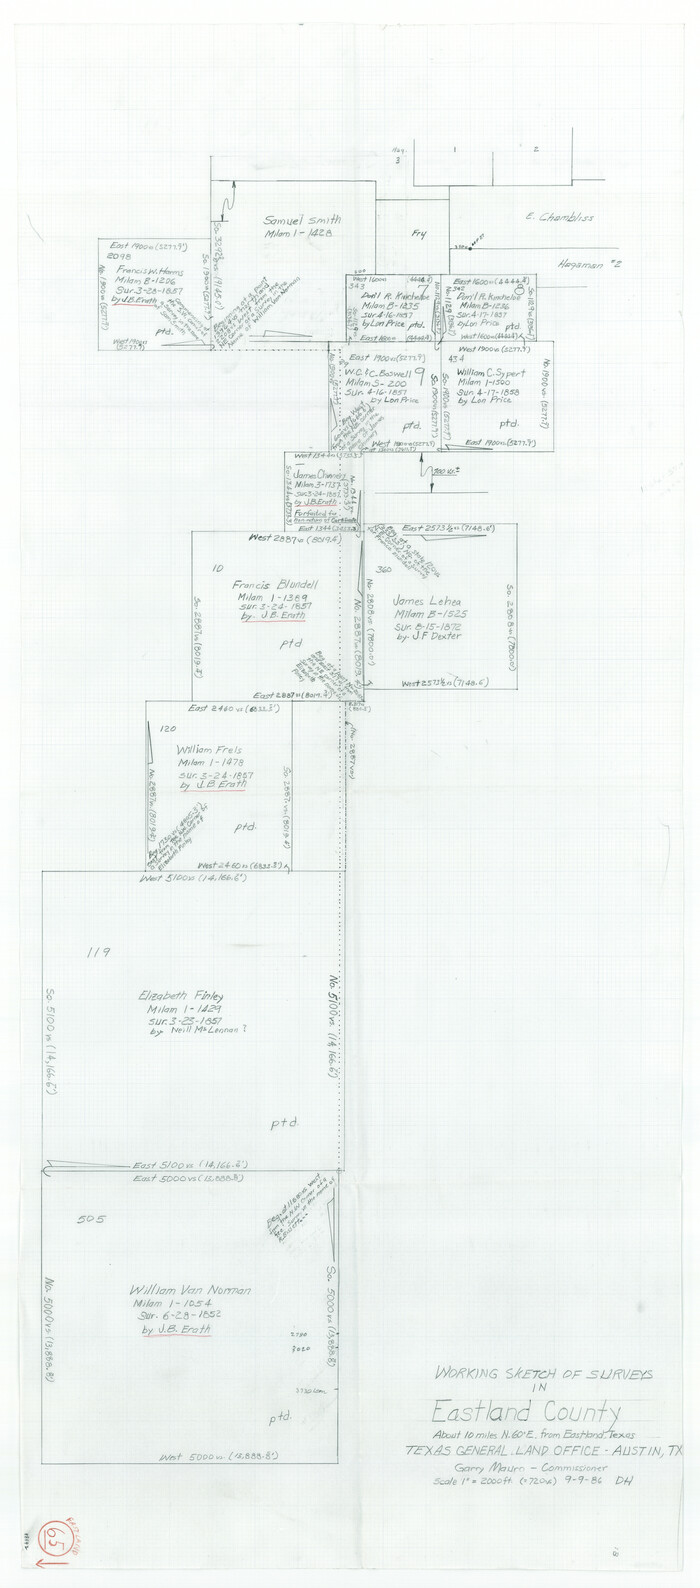 88892, Eastland County Working Sketch 65, General Map Collection